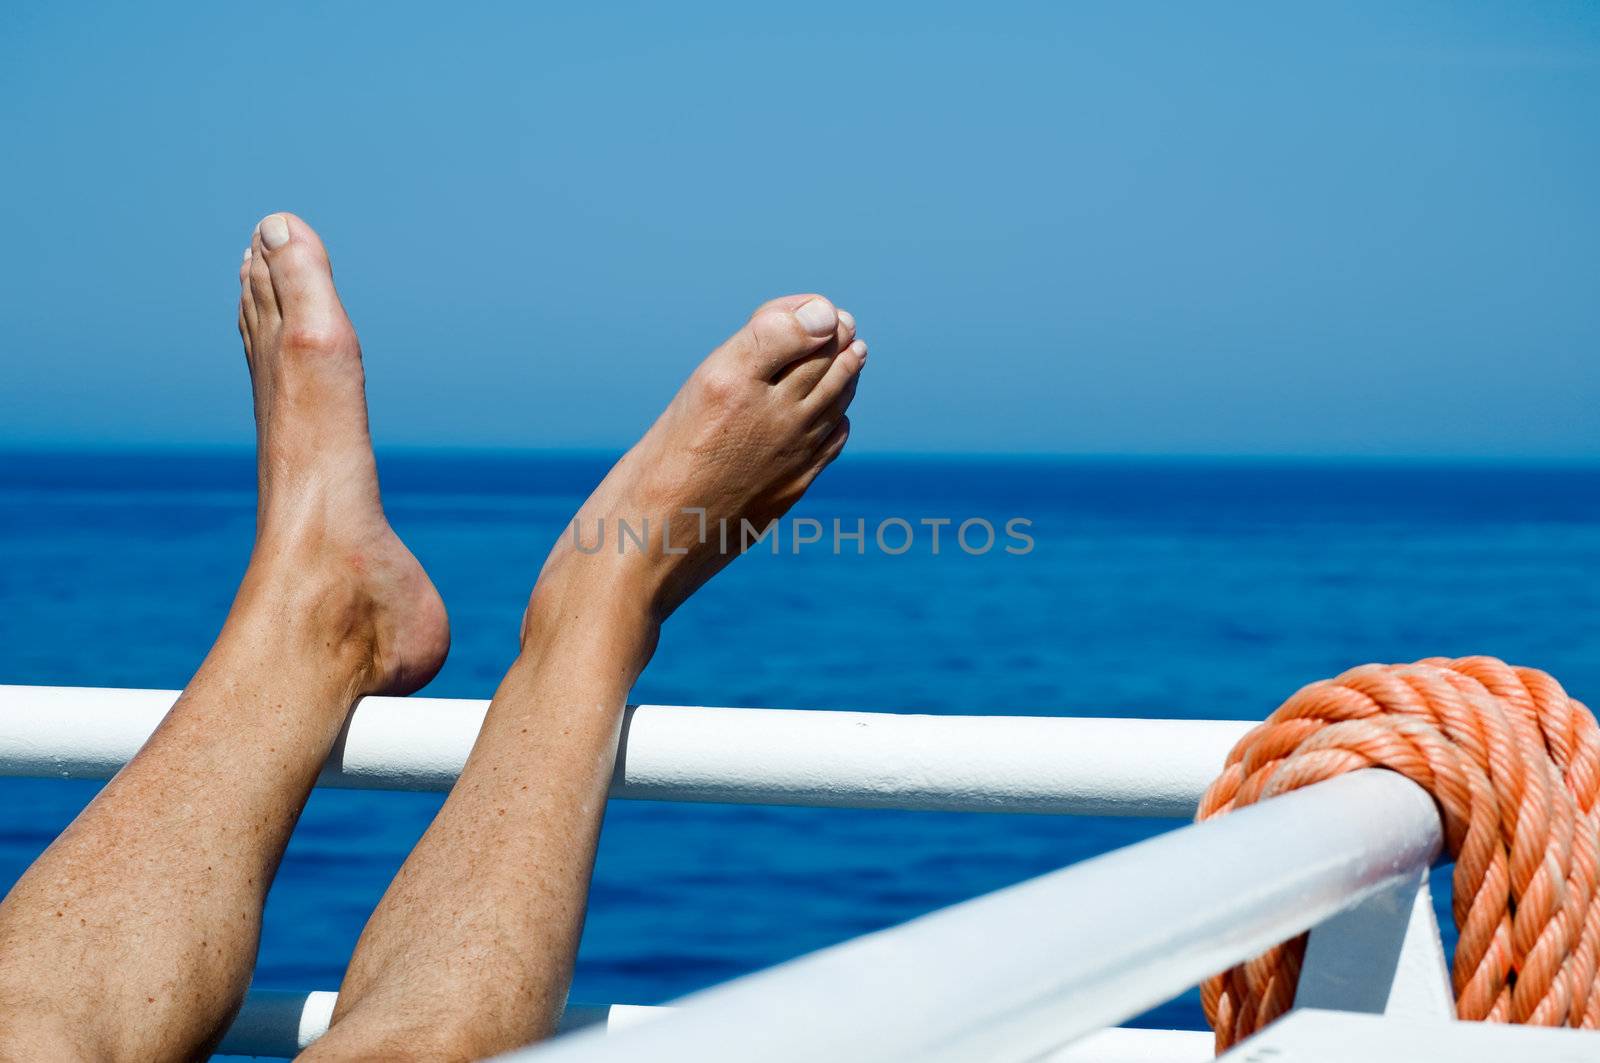 Feet on the railing on a cruise liner